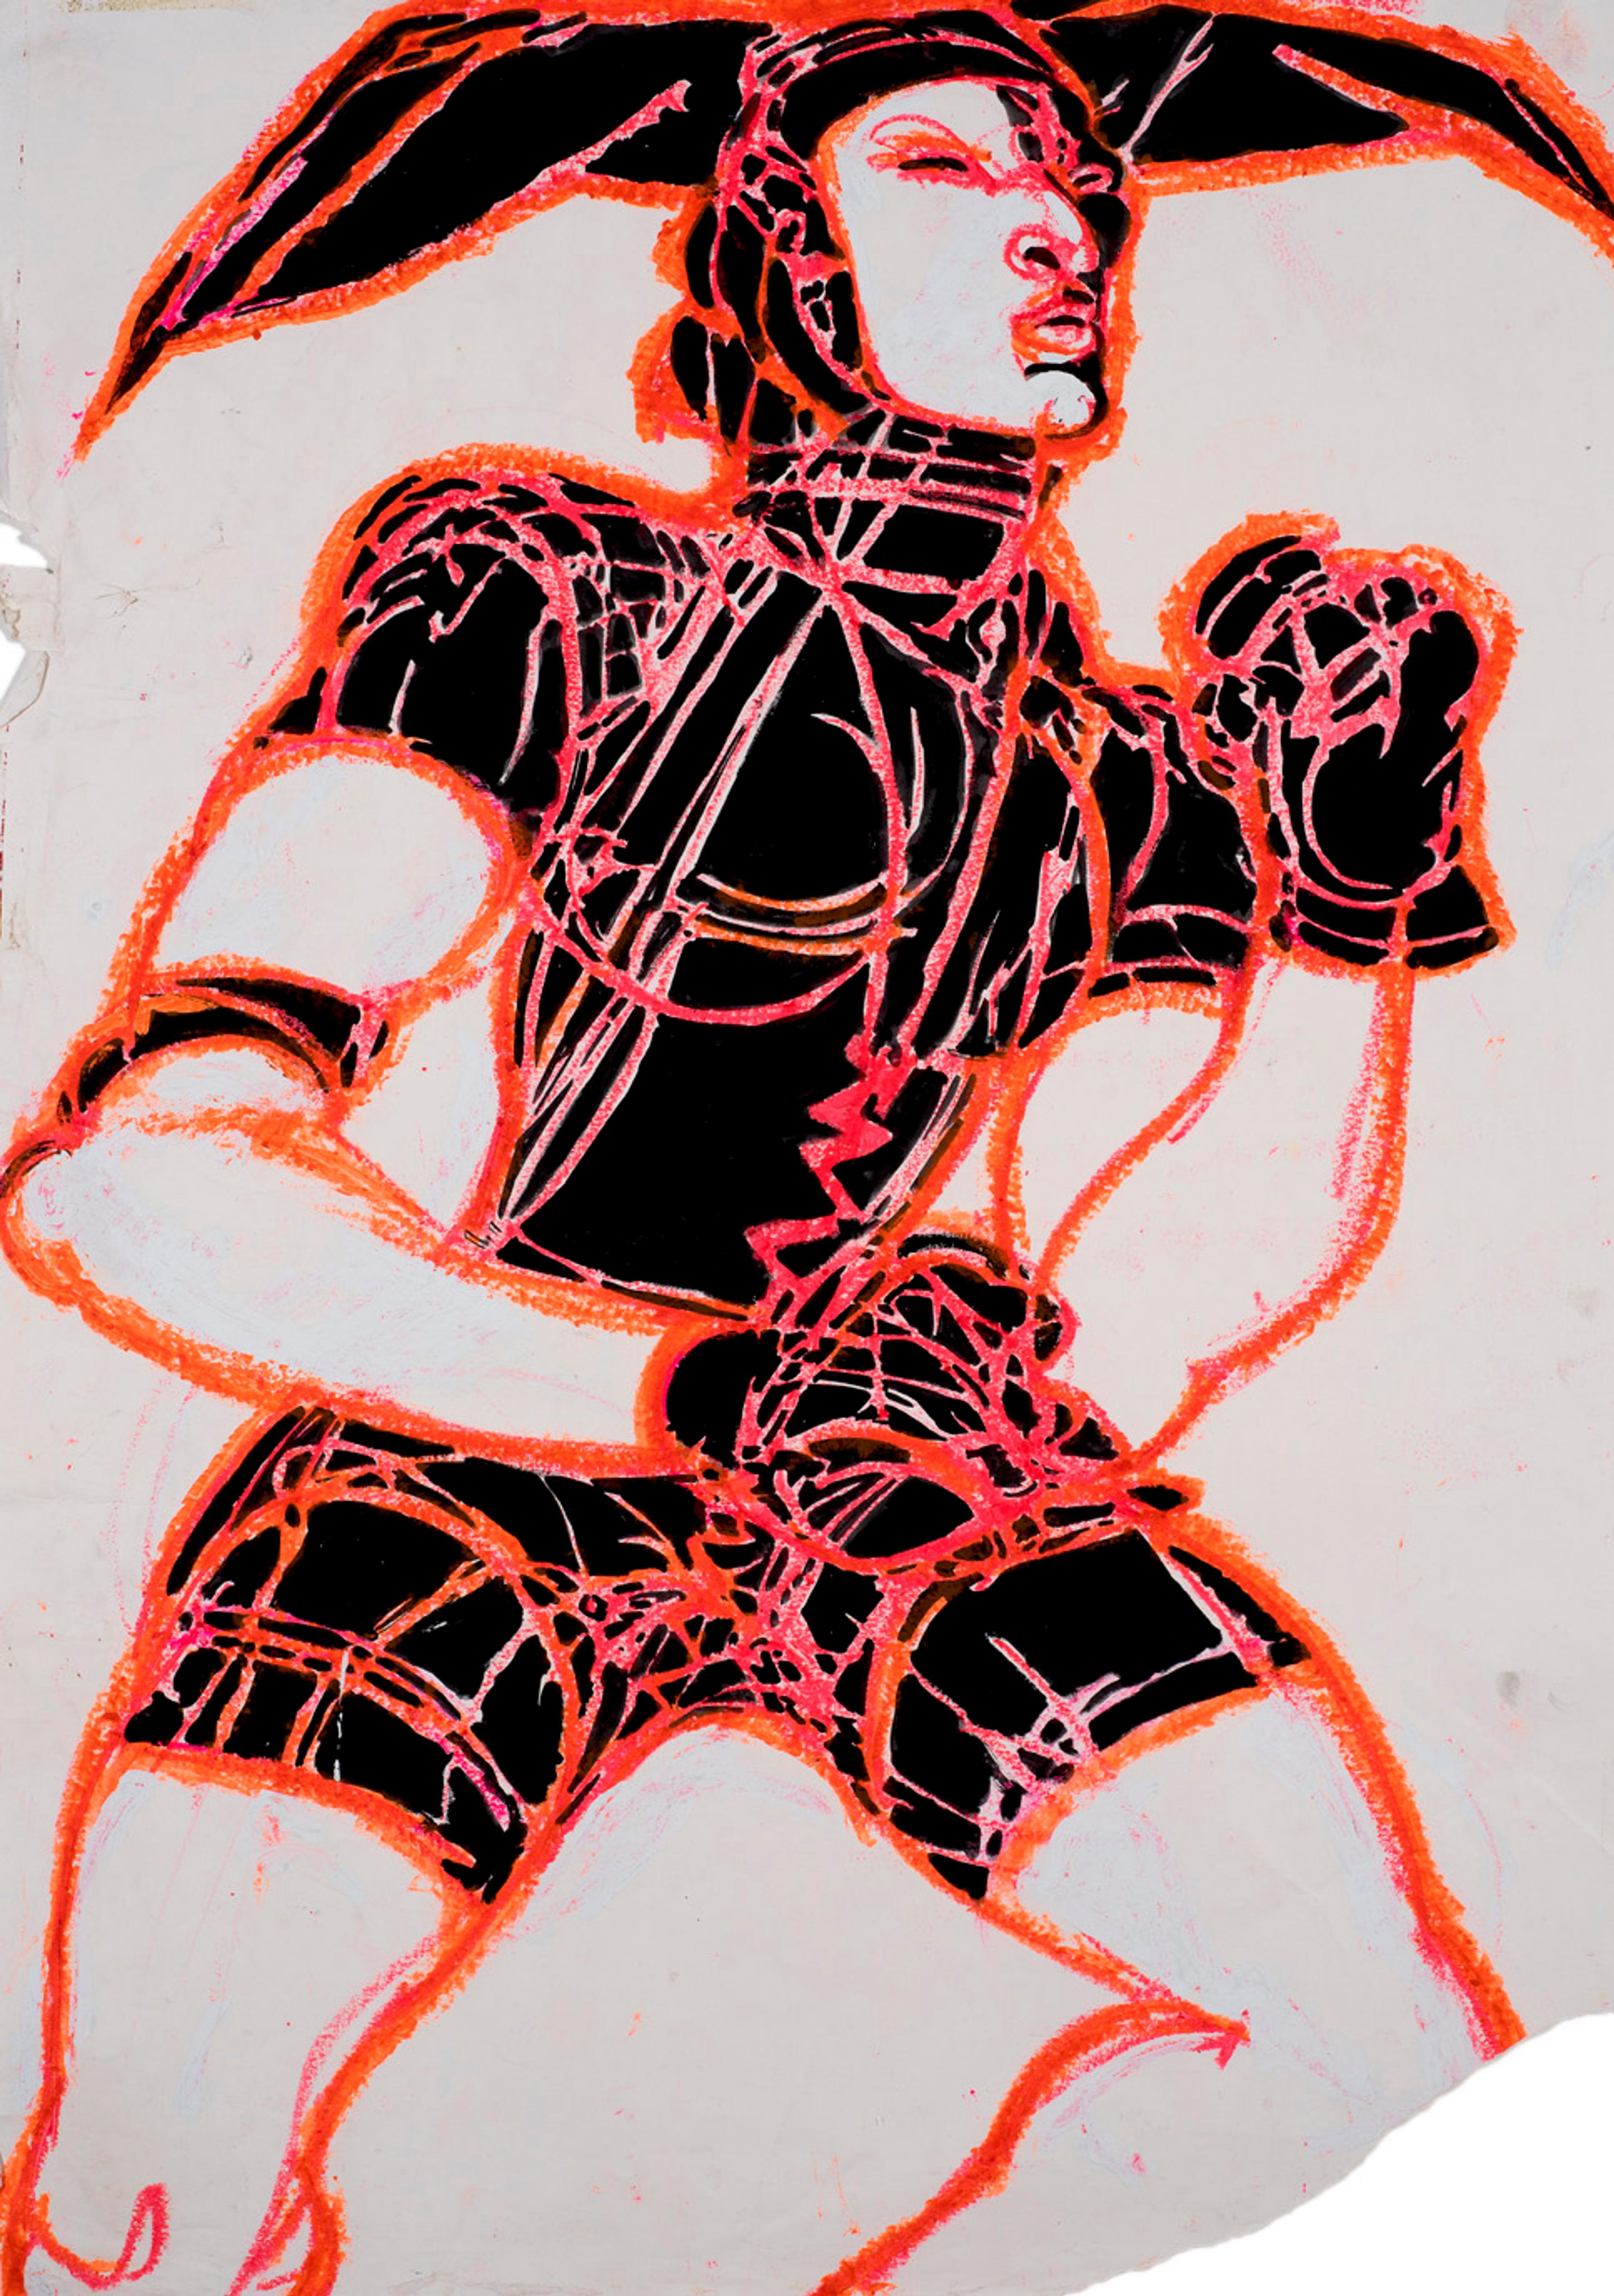 A drawing of a person dancing dressed in a black bodysuit, gloves and hat. They are drawn with red and orange lines on white paper.